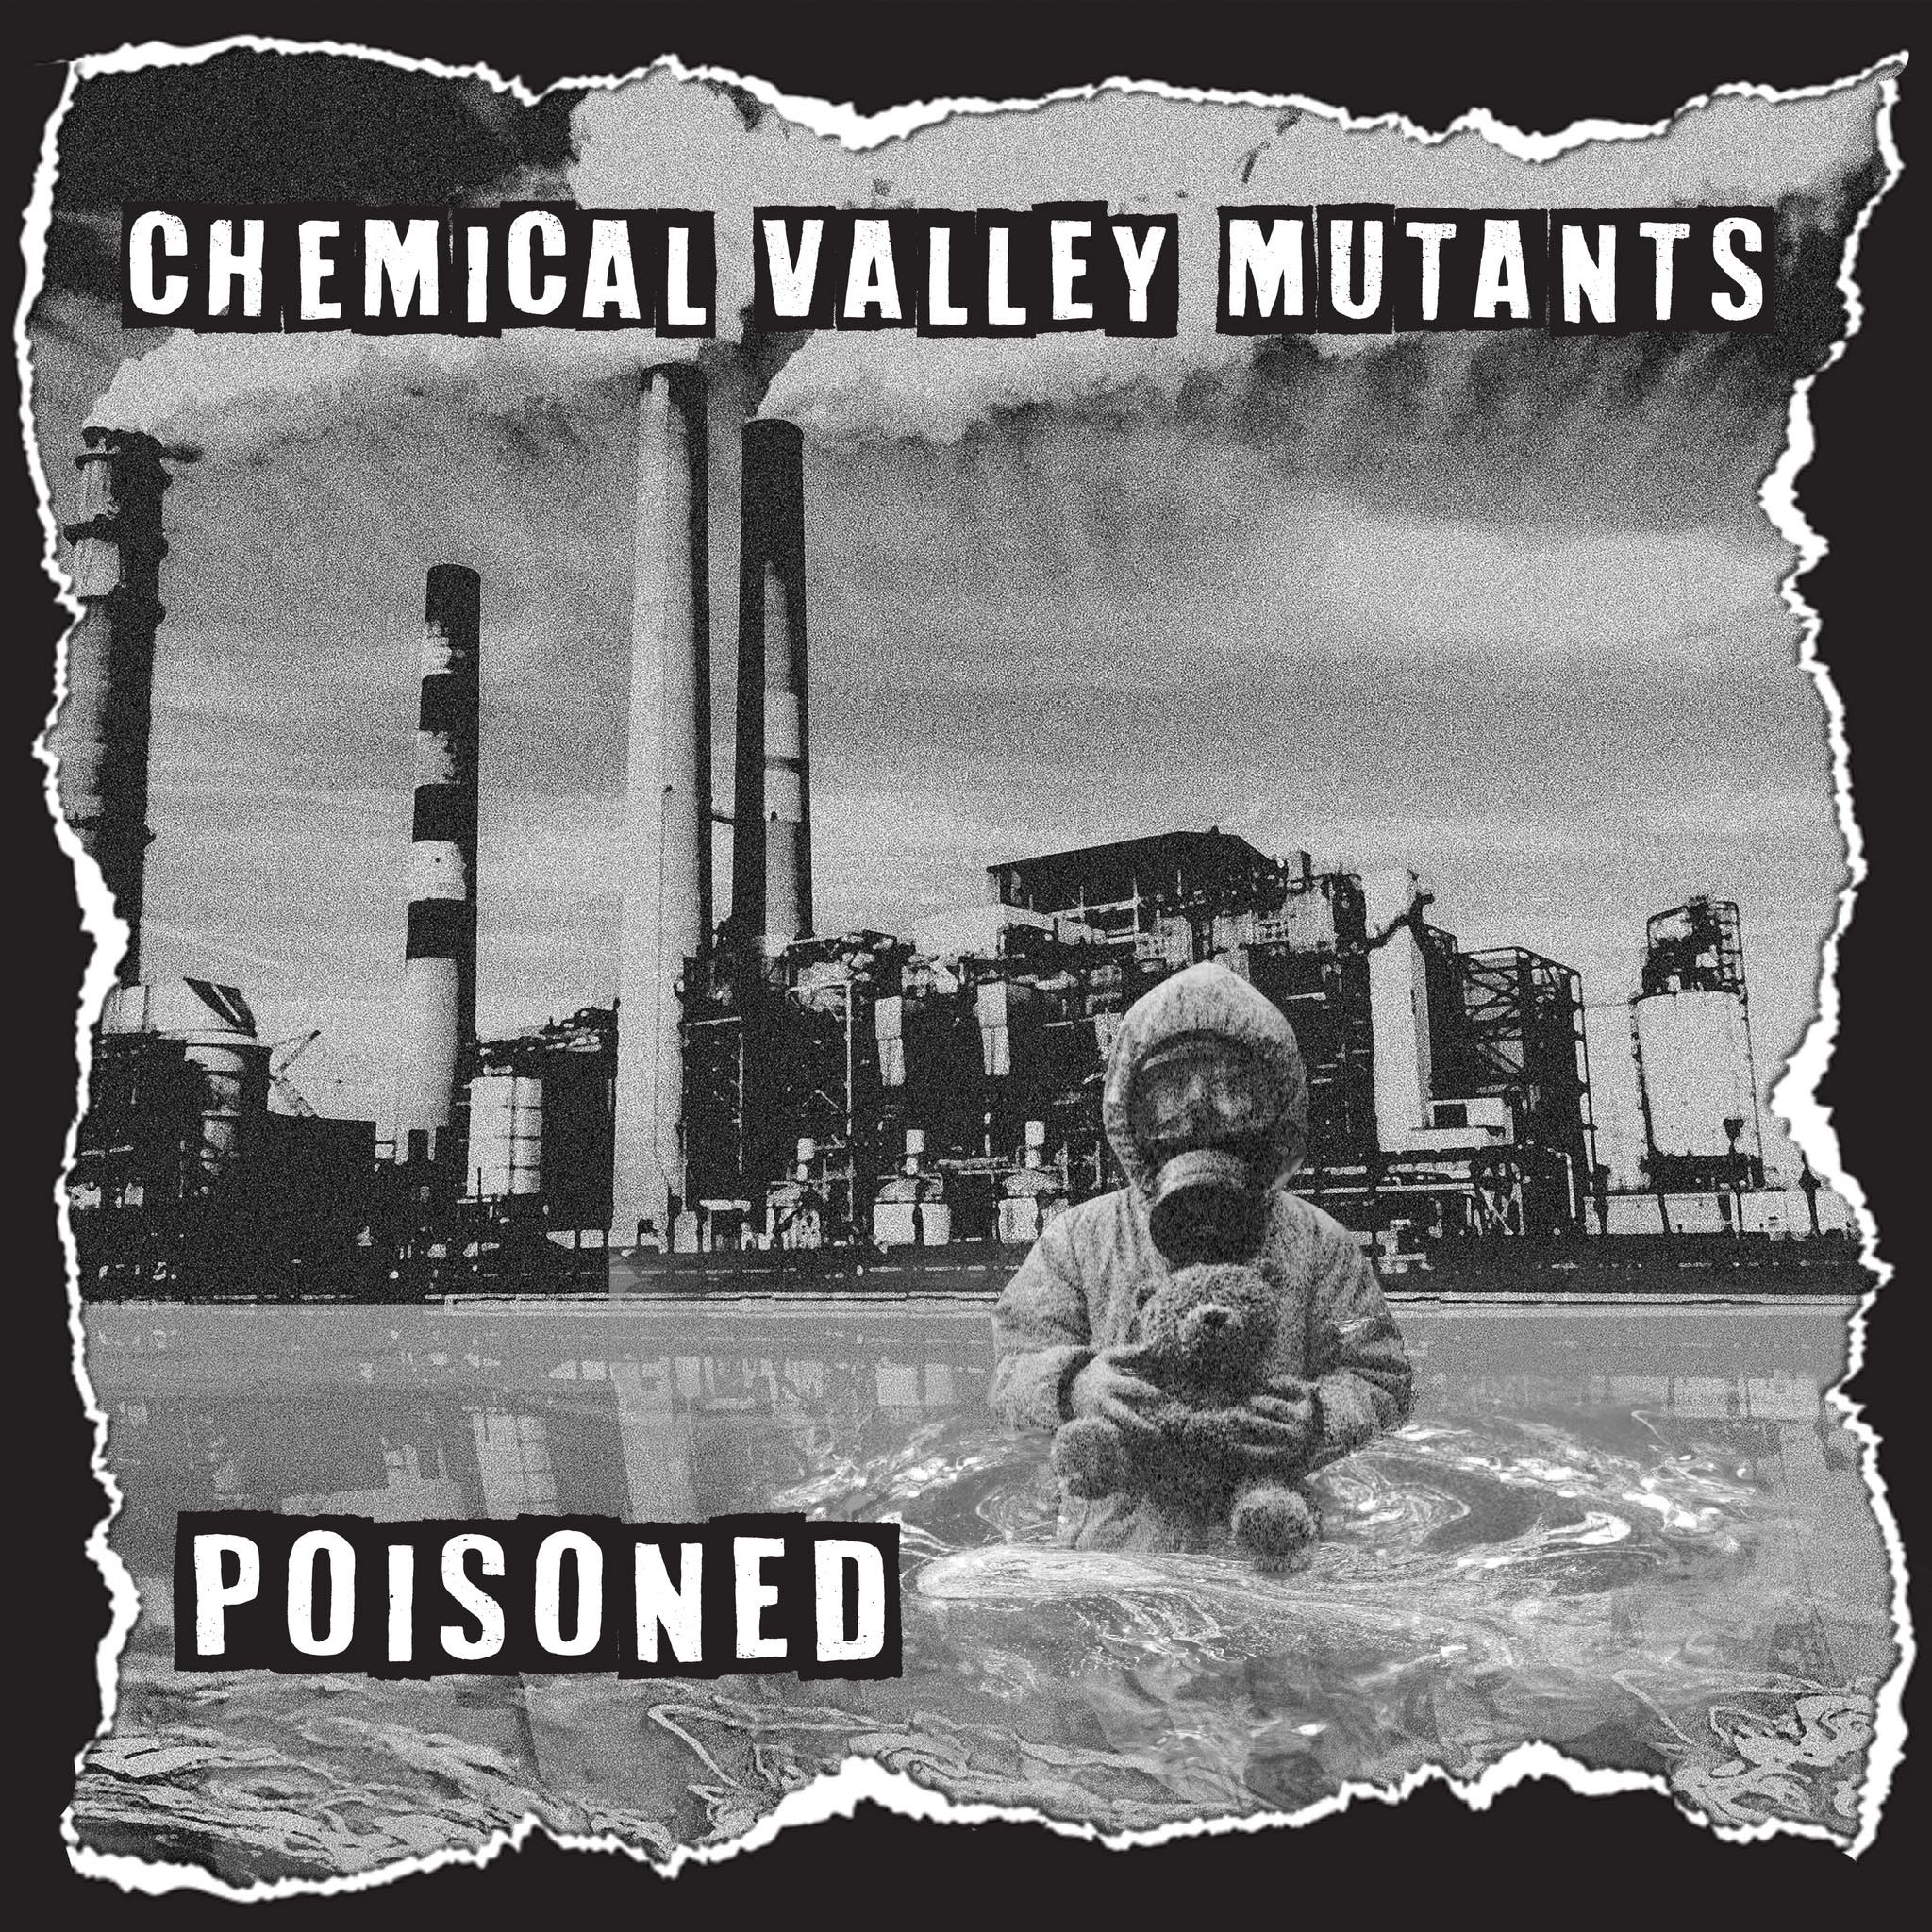 Chemical Valley Mutants To Release Debut Album "Poisoned"